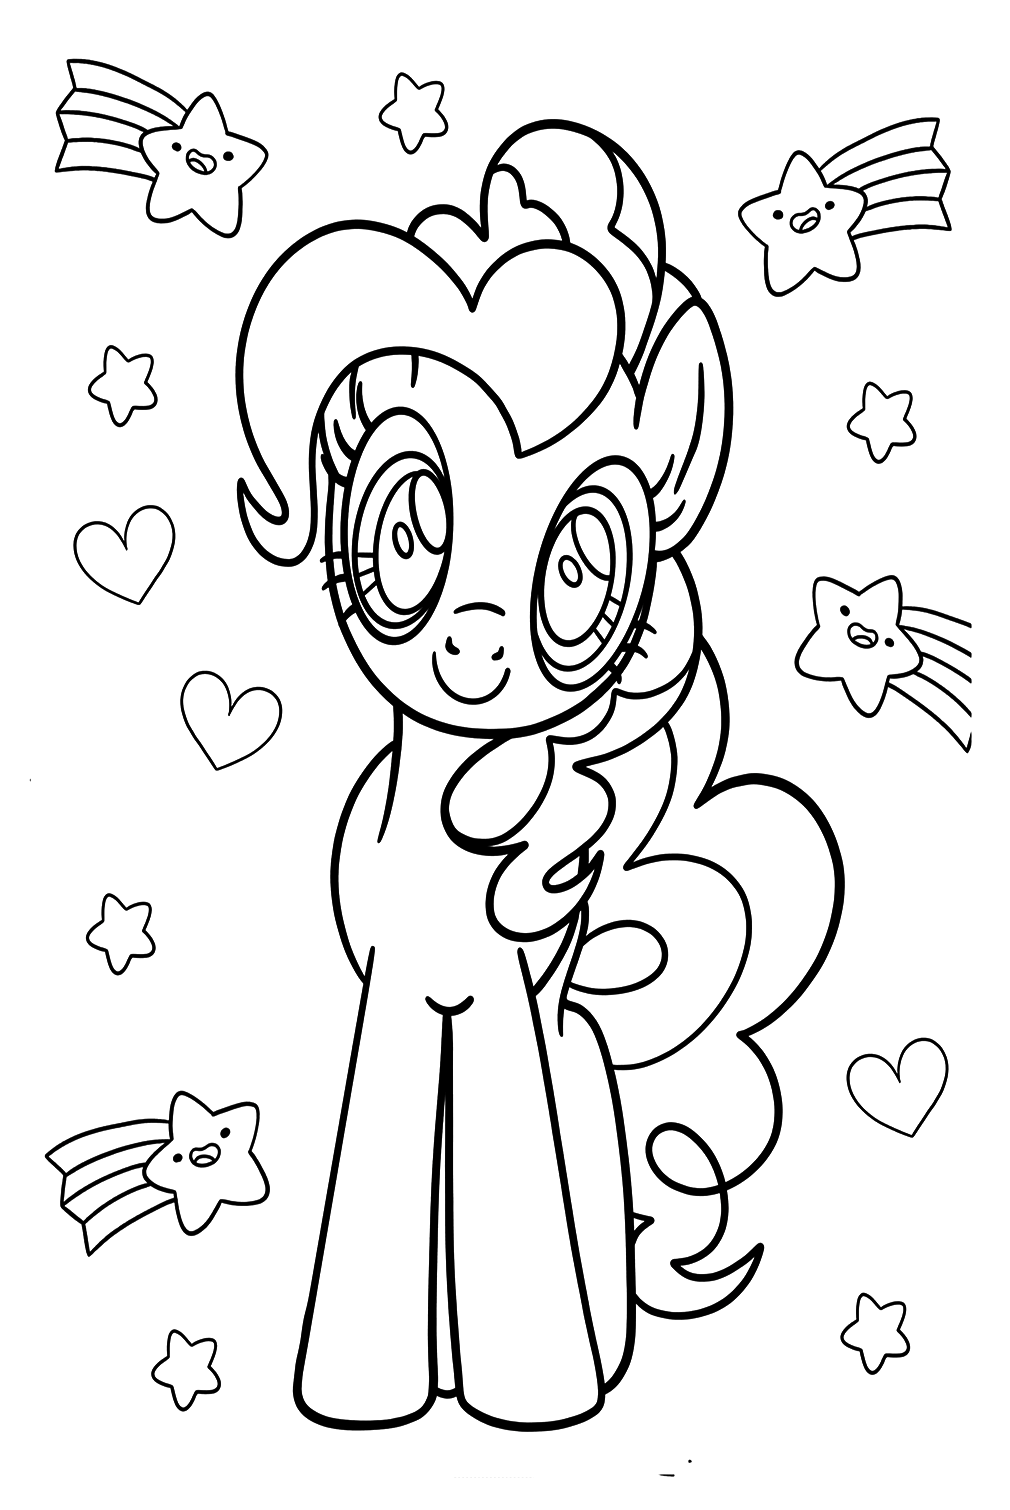 Fluttershy Pony Coloring Page from Fluttershy